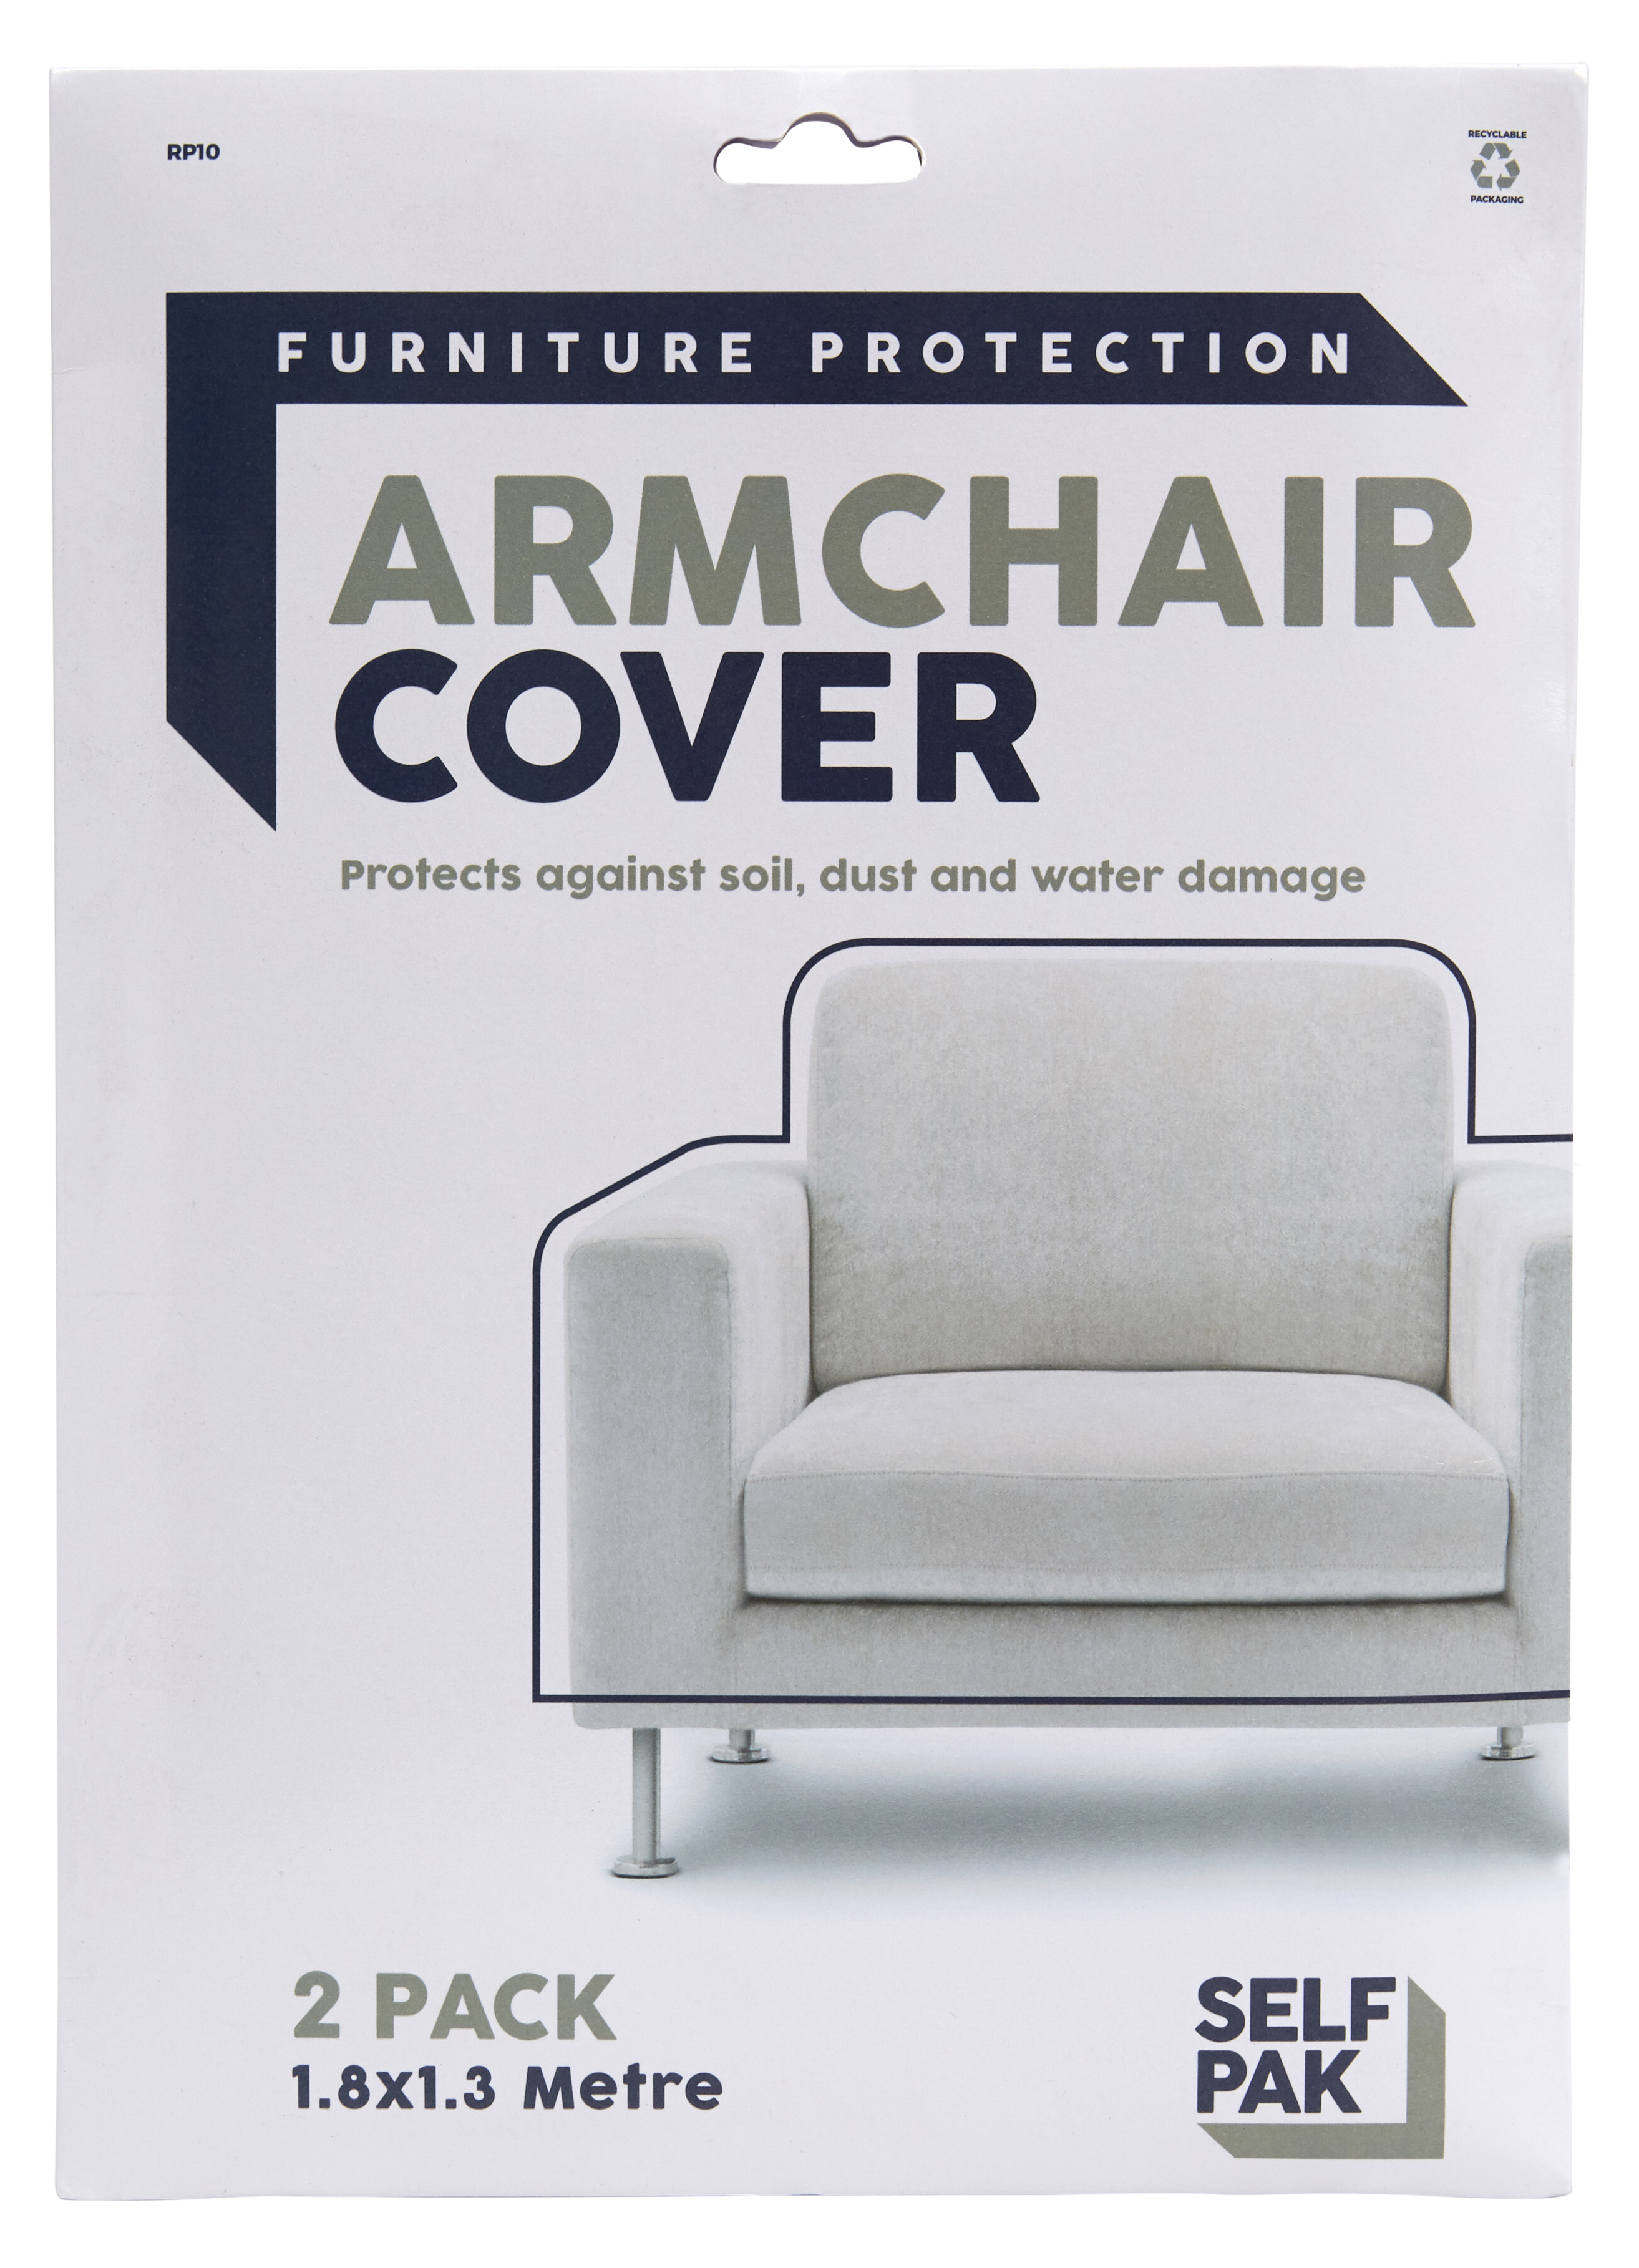 Clear armchair covers